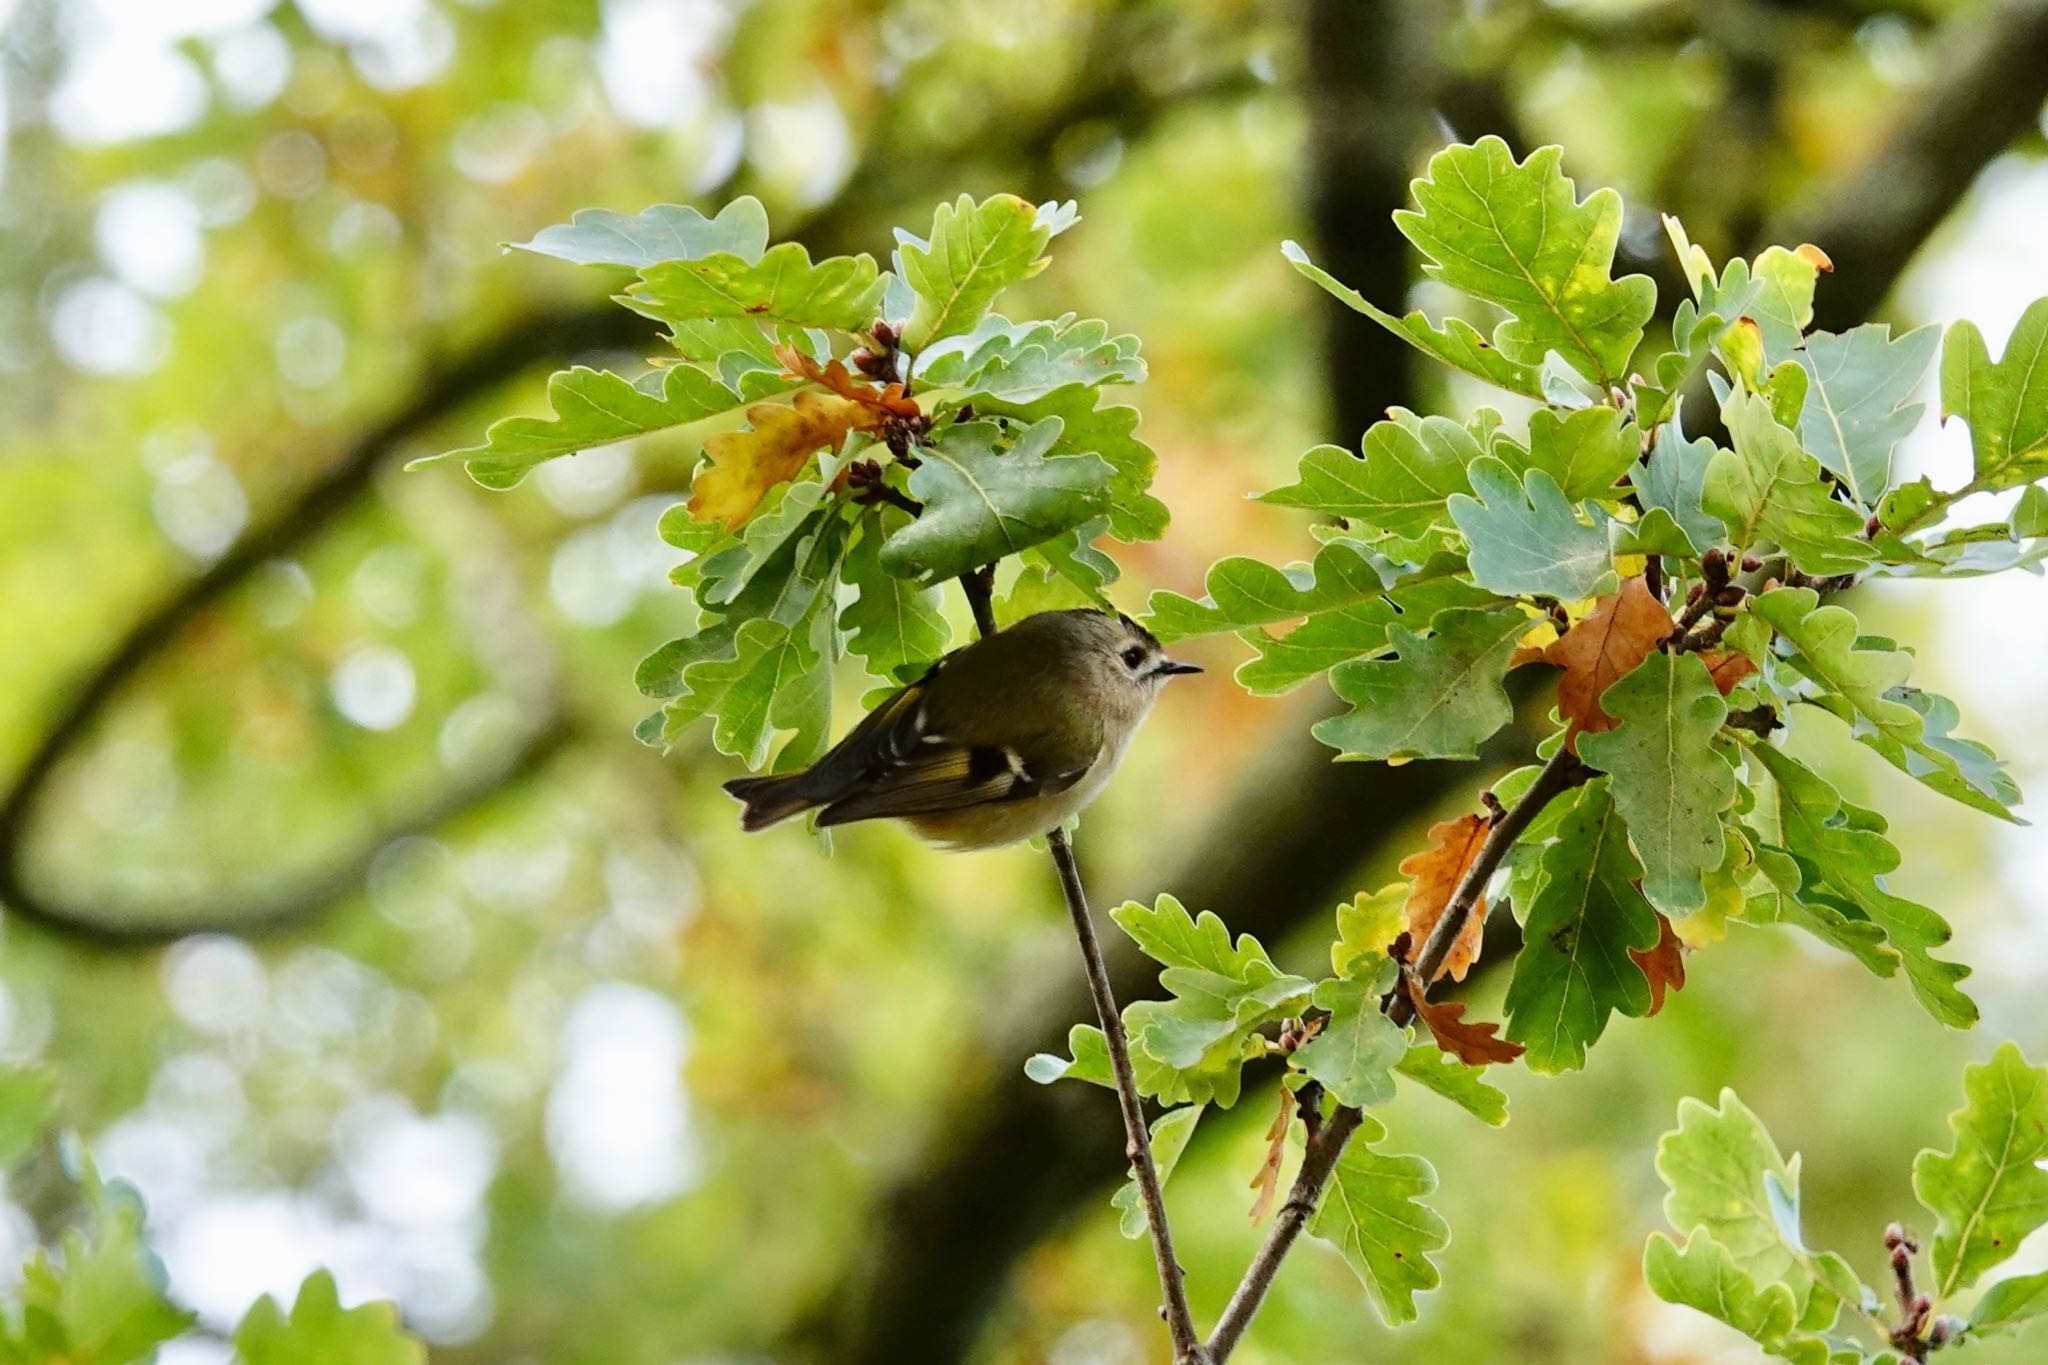 Photo of Goldcrest at Saint-Germain-en-Laye,France by のどか